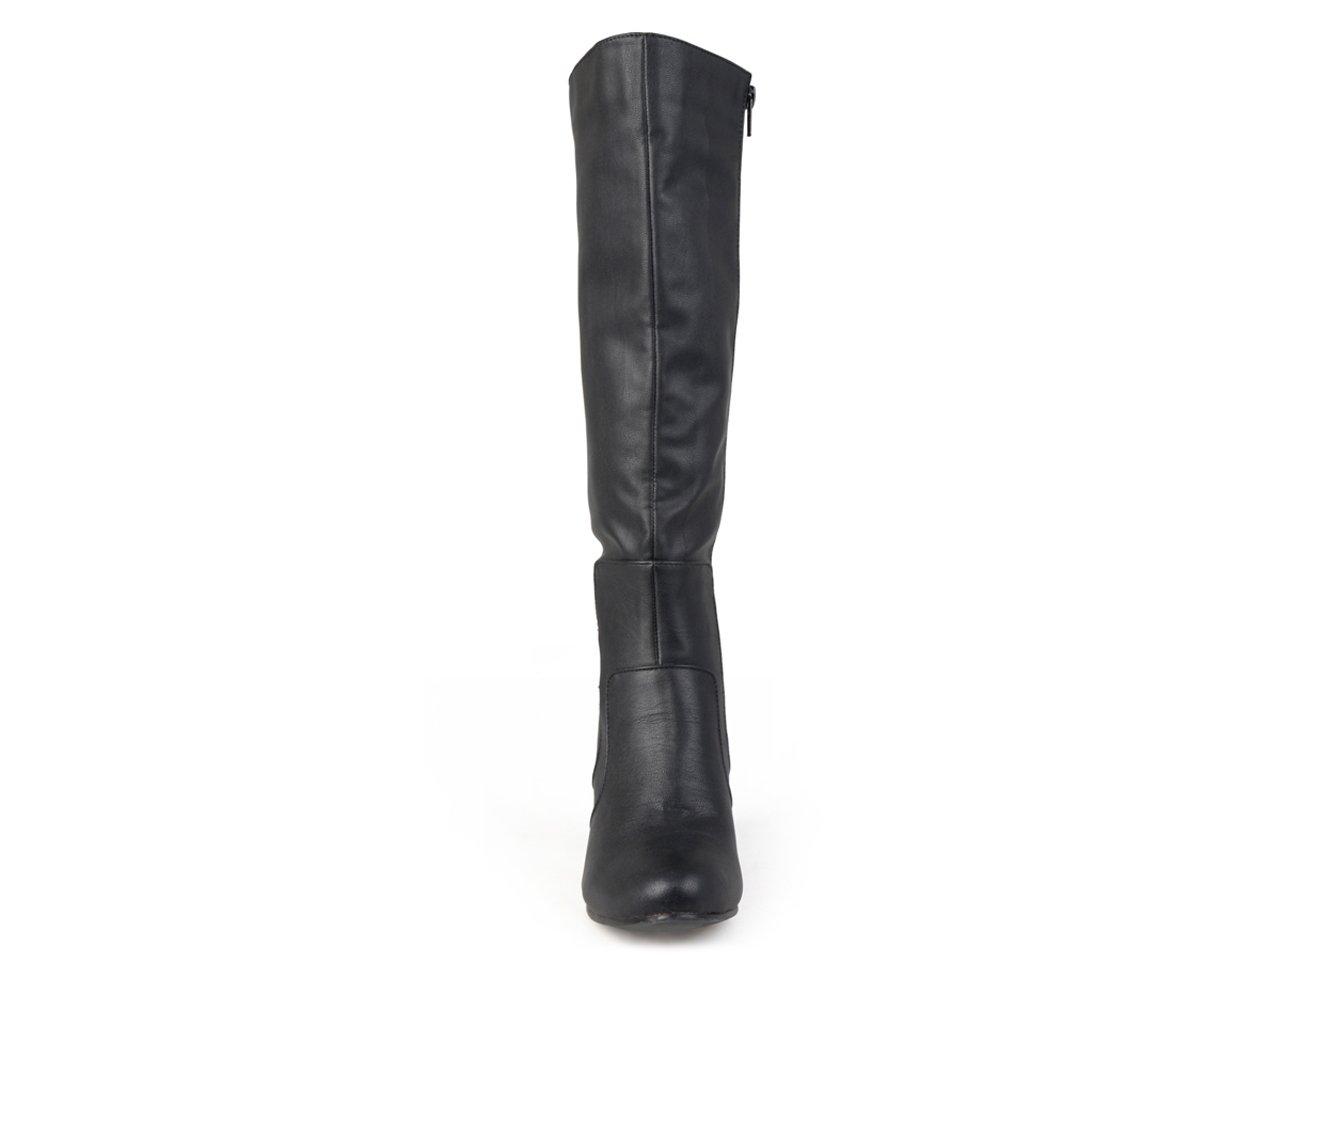 Women's Journee Collection Carver Wide Calf Knee High Boots | Shoe Carnival